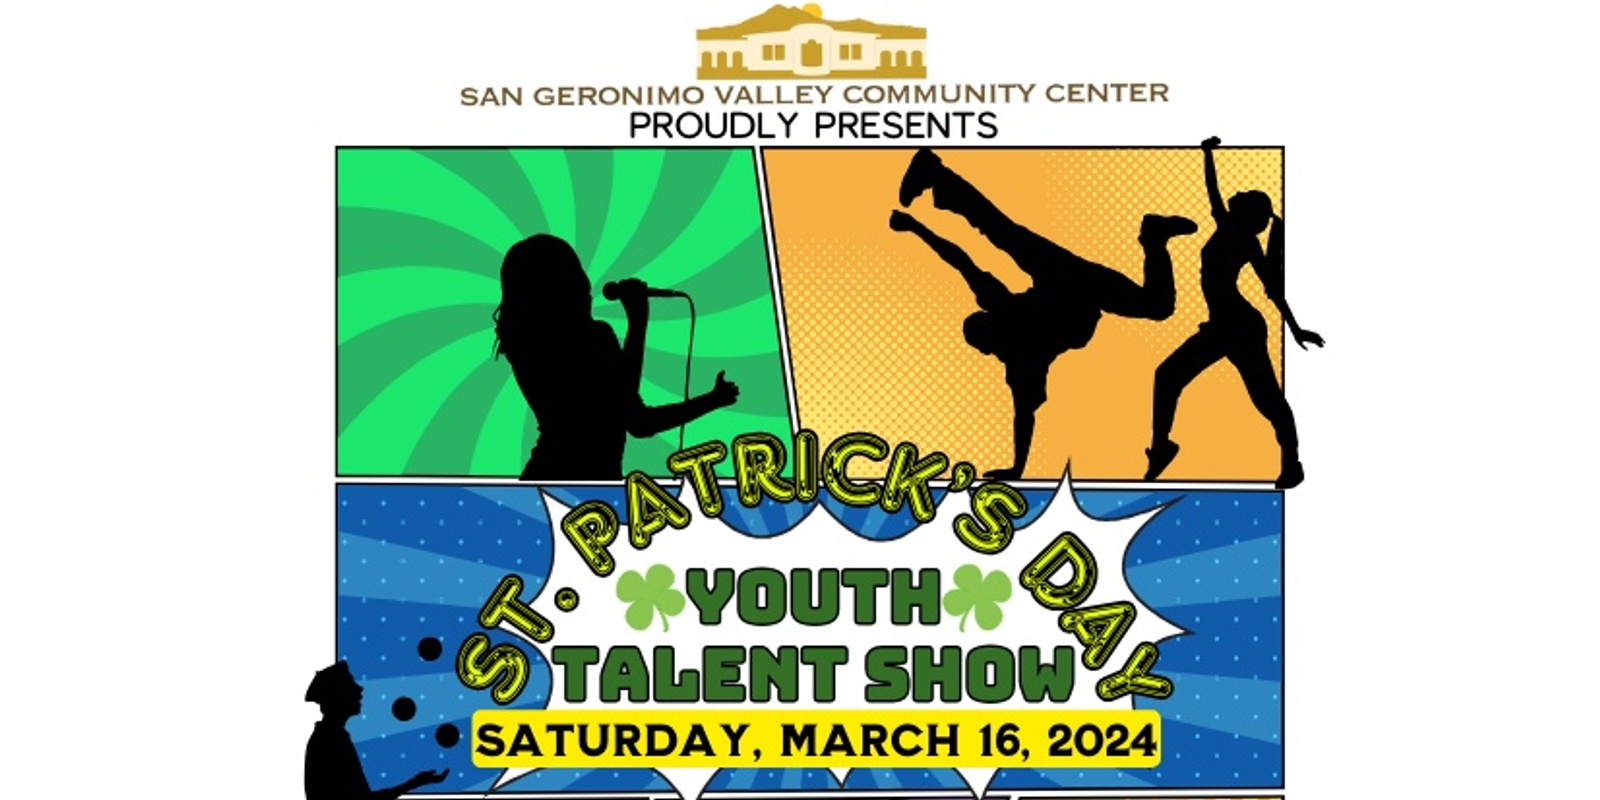 Banner image for Annual St. Patricks Day Youth Talent Show